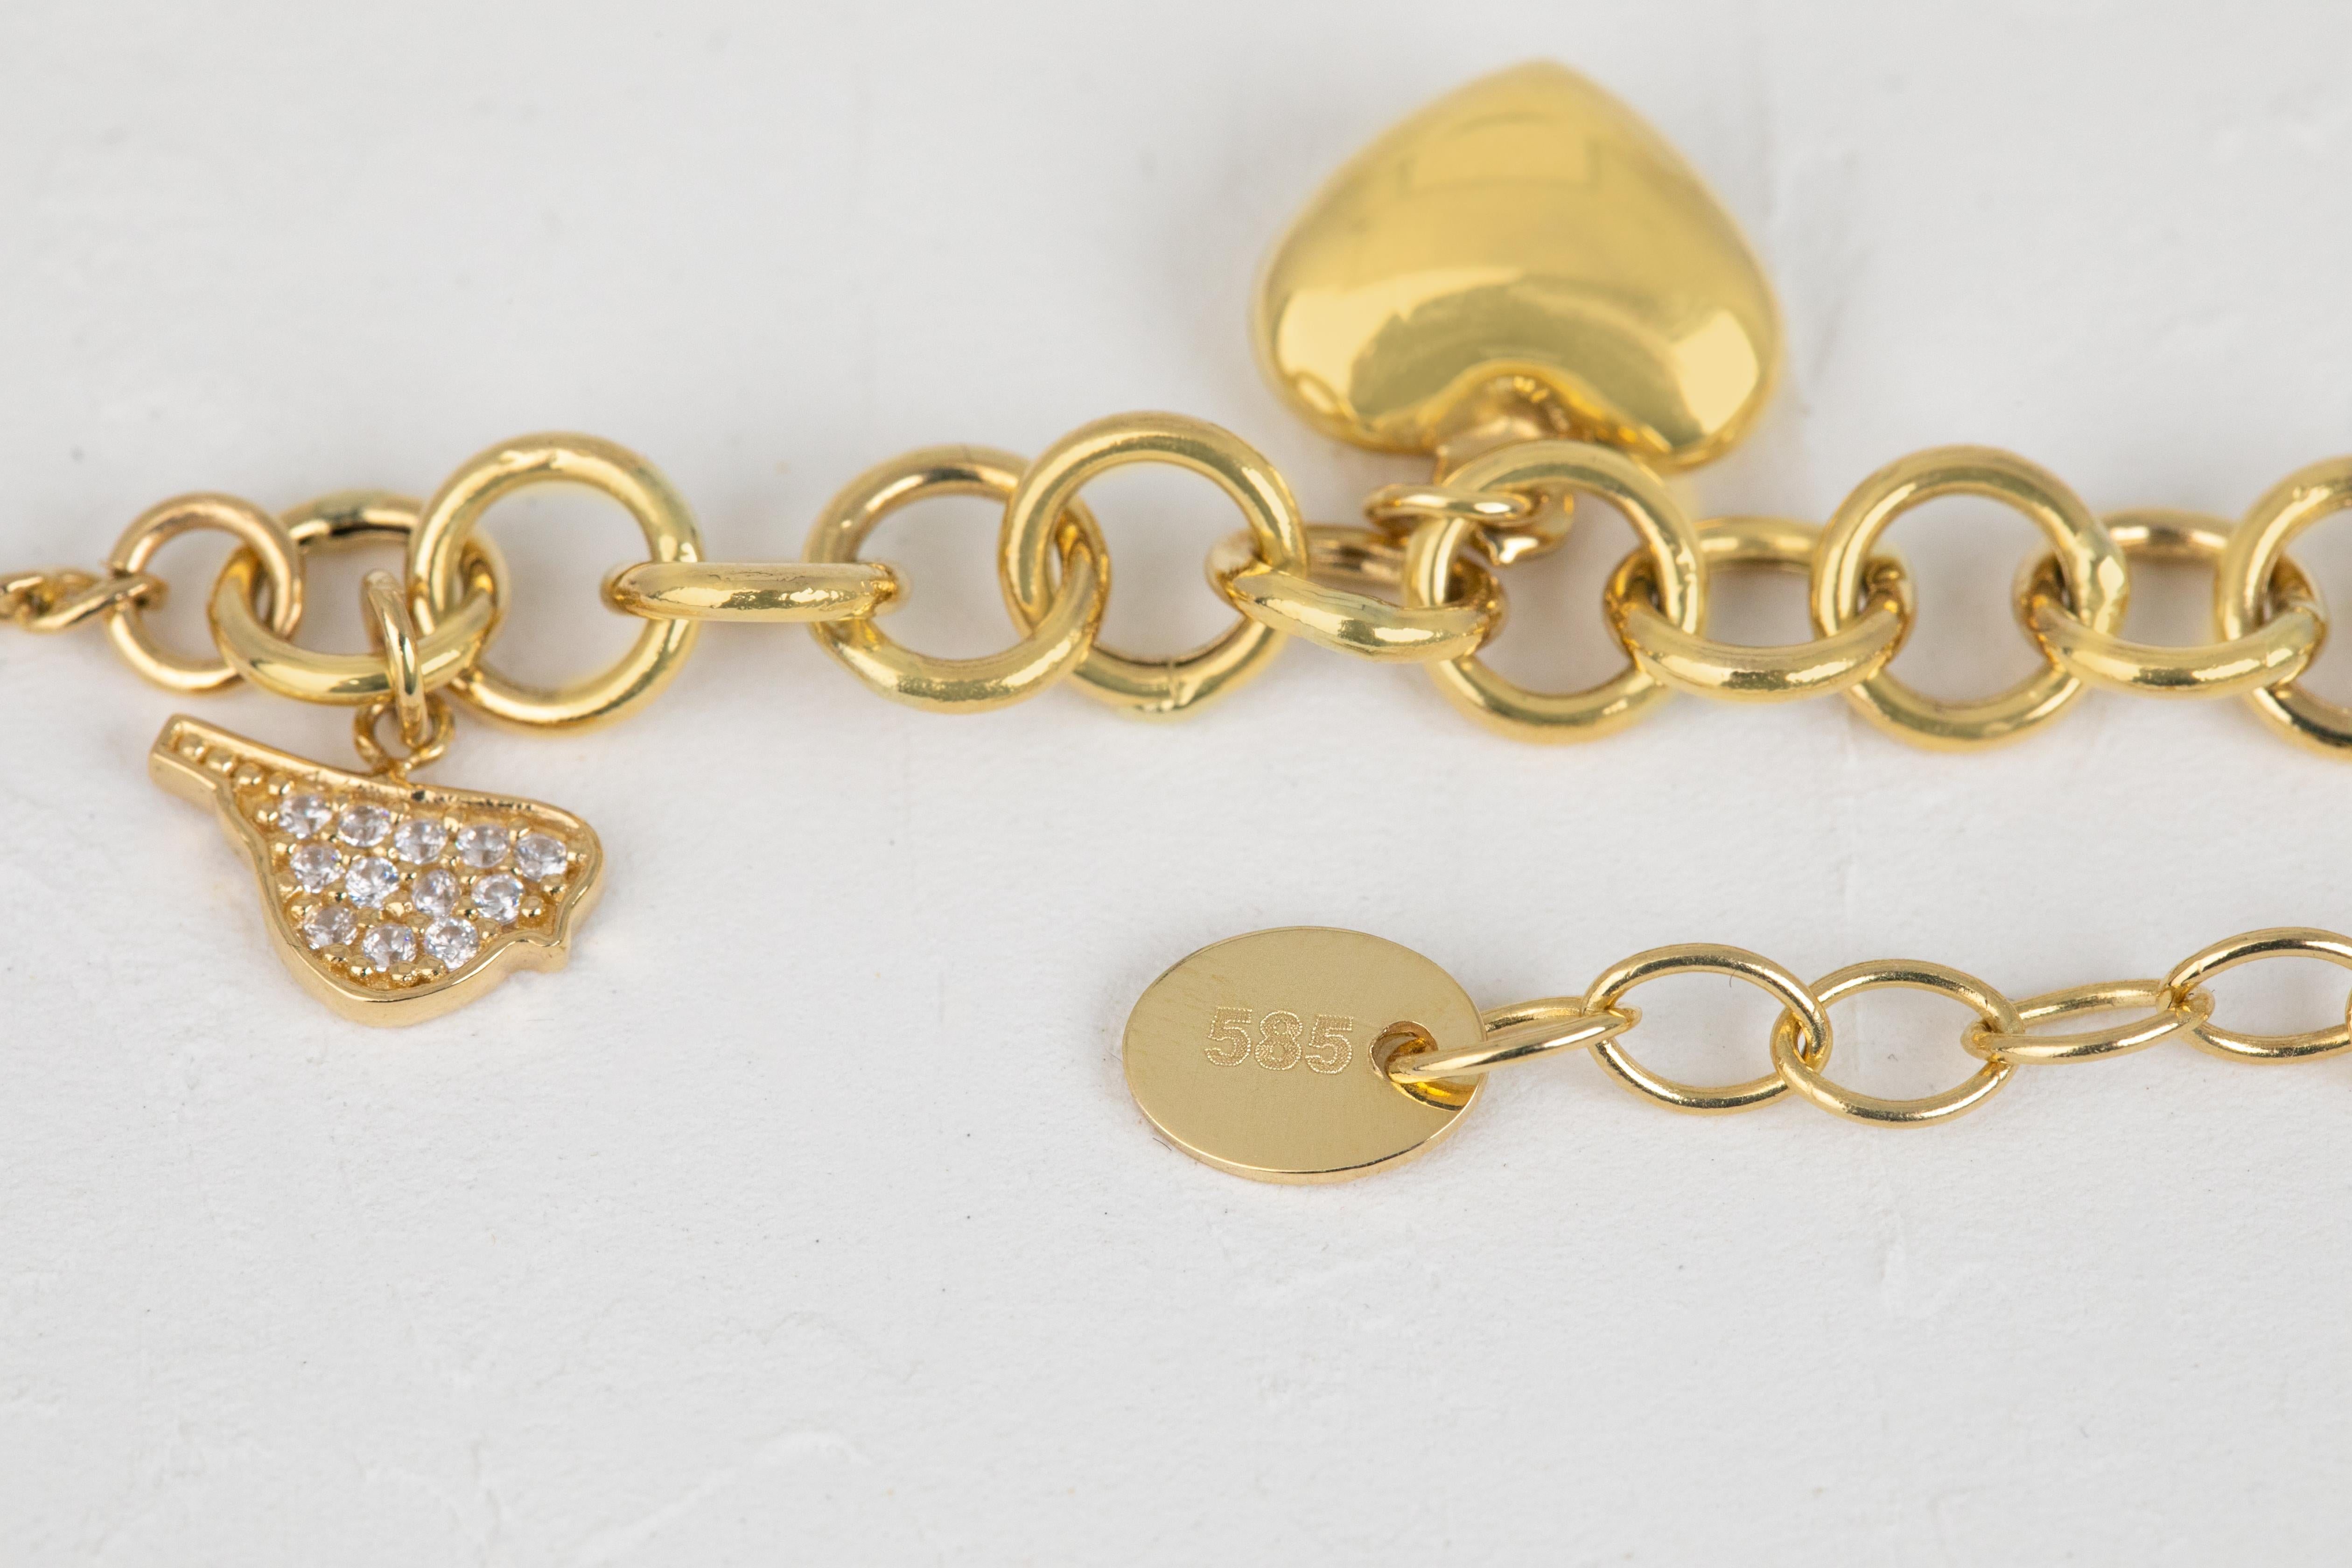 14k Gold Bracelet with Bold Chain, 14k Gold Chain and Heart Sembol Bracelet For Sale 8